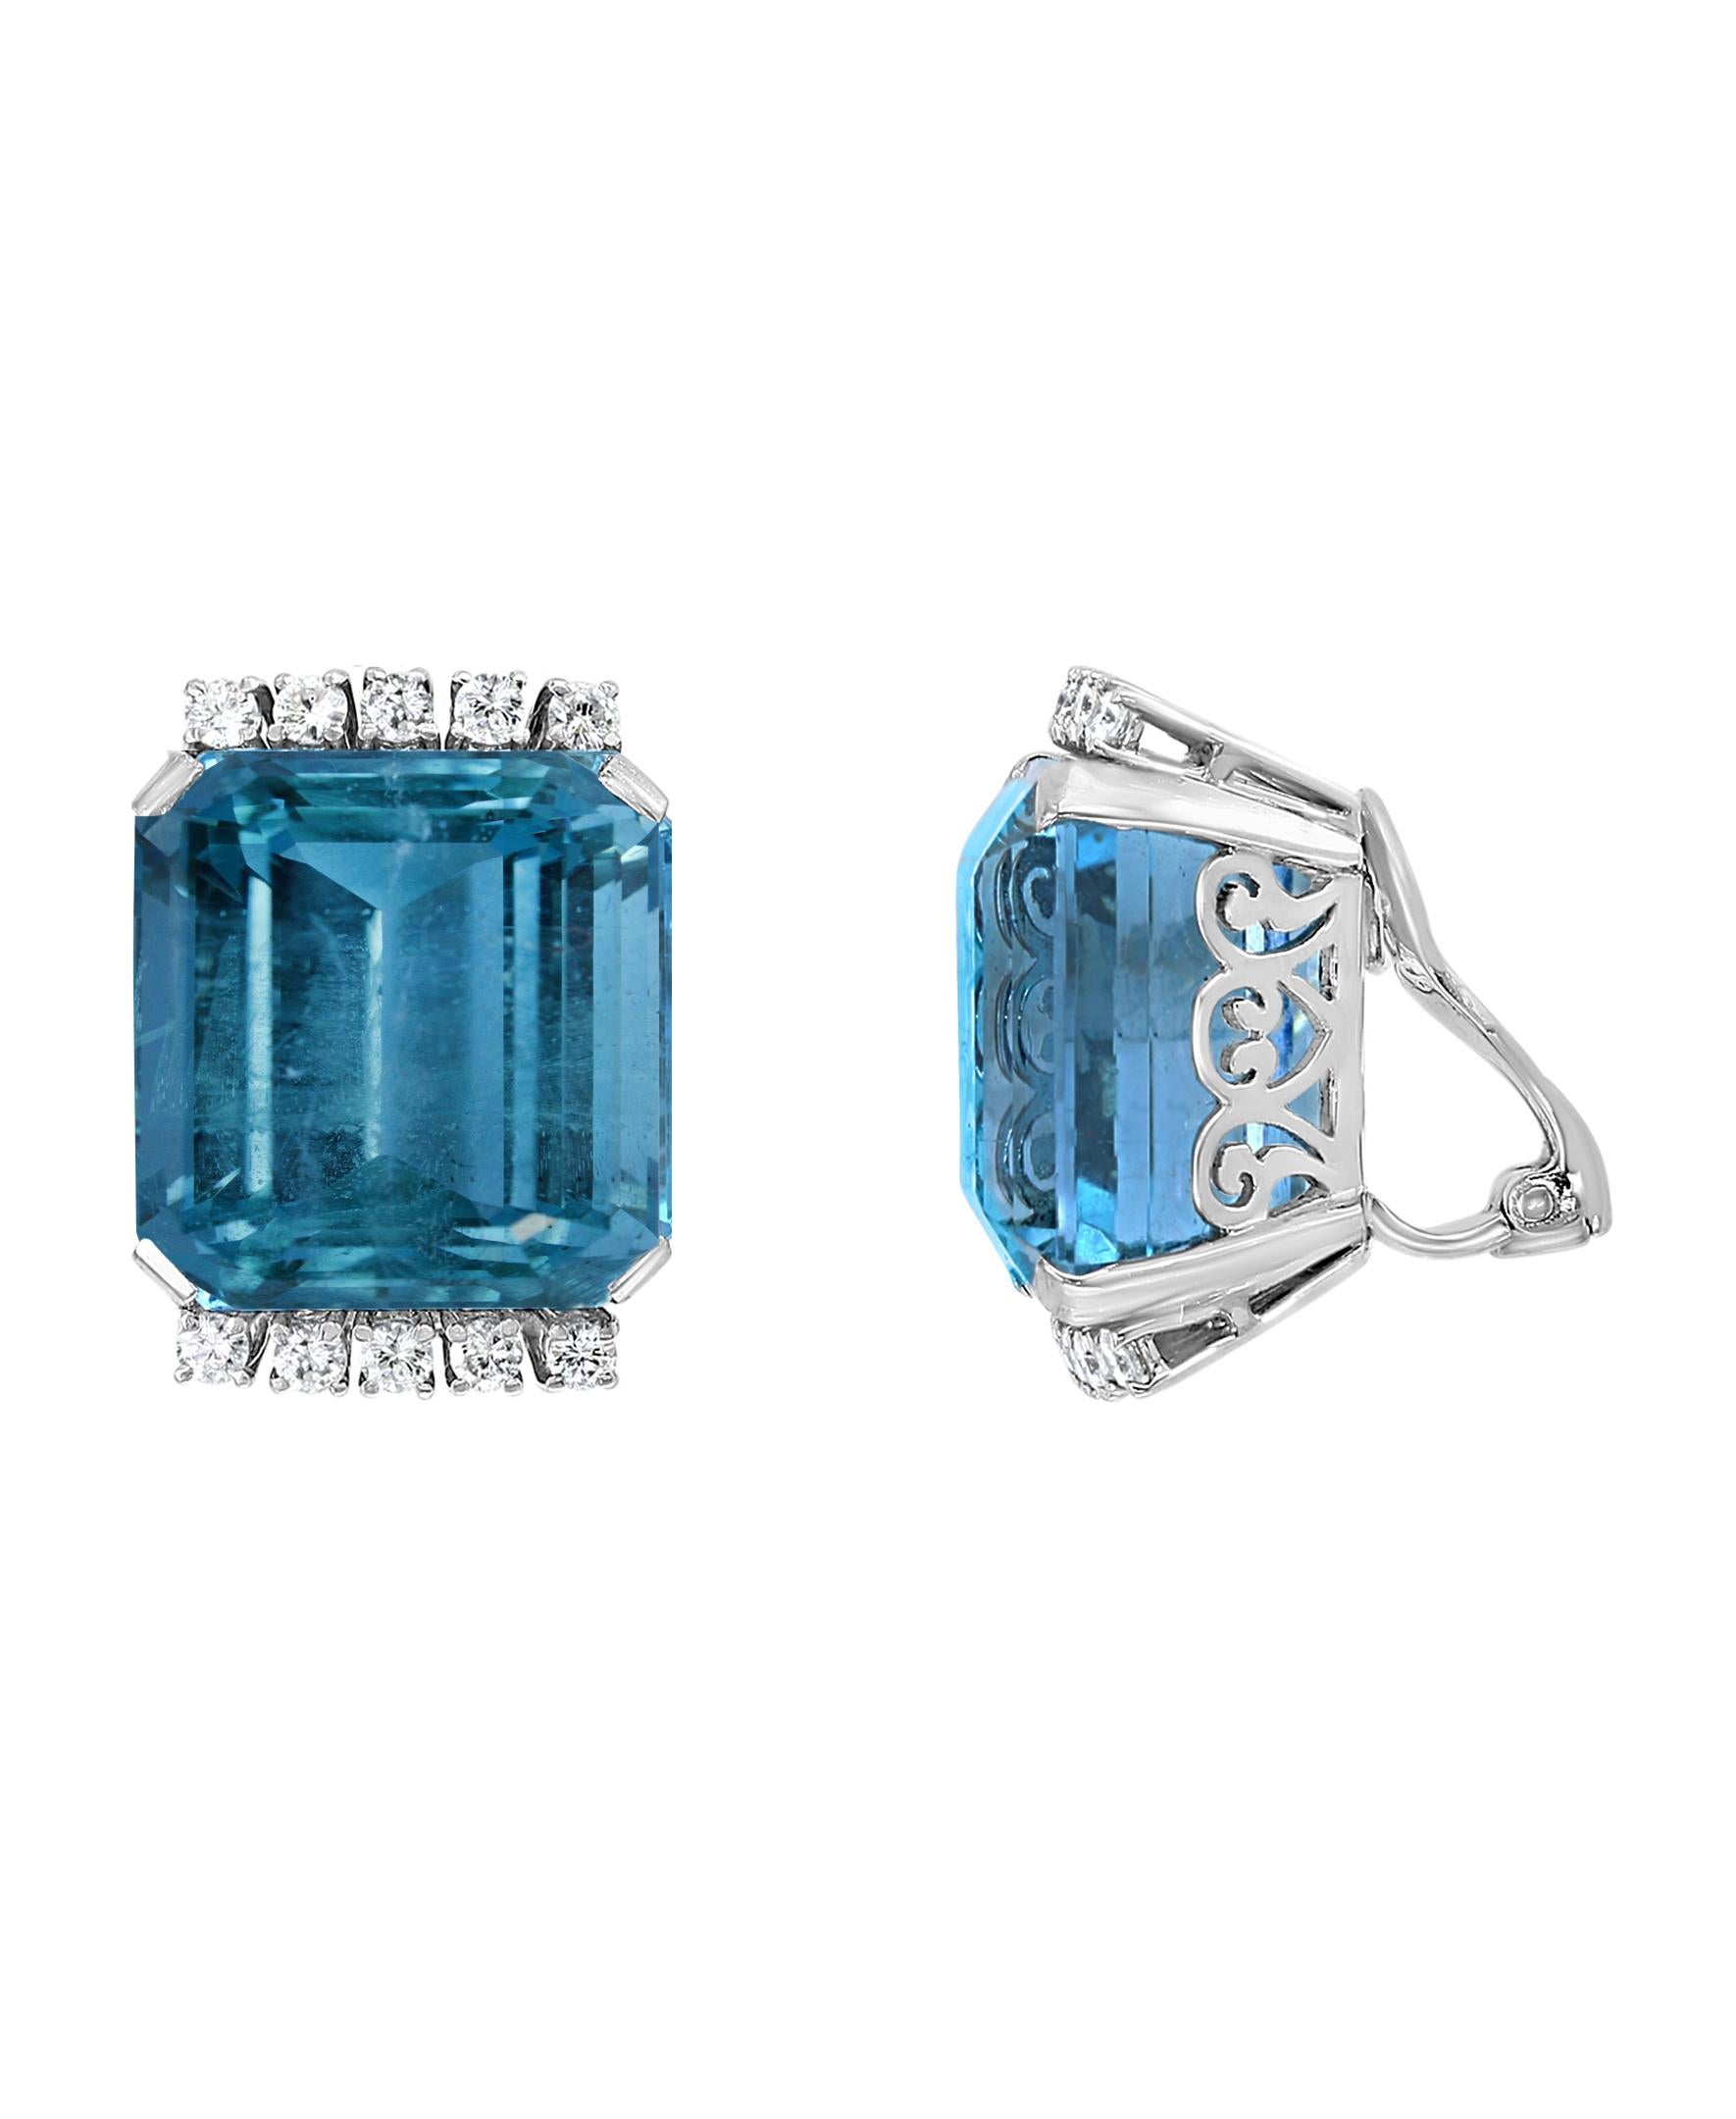 43 Carat  Natural Aquamarine & Diamond Cocktail  Earring , 18 K White Gold , 
Quality is so high that it can be called Museum quality.
Very desirable color and quality.
perfect pair made in 18 Karat White gold
Gold 24 Grams
 Diamonds: approximate